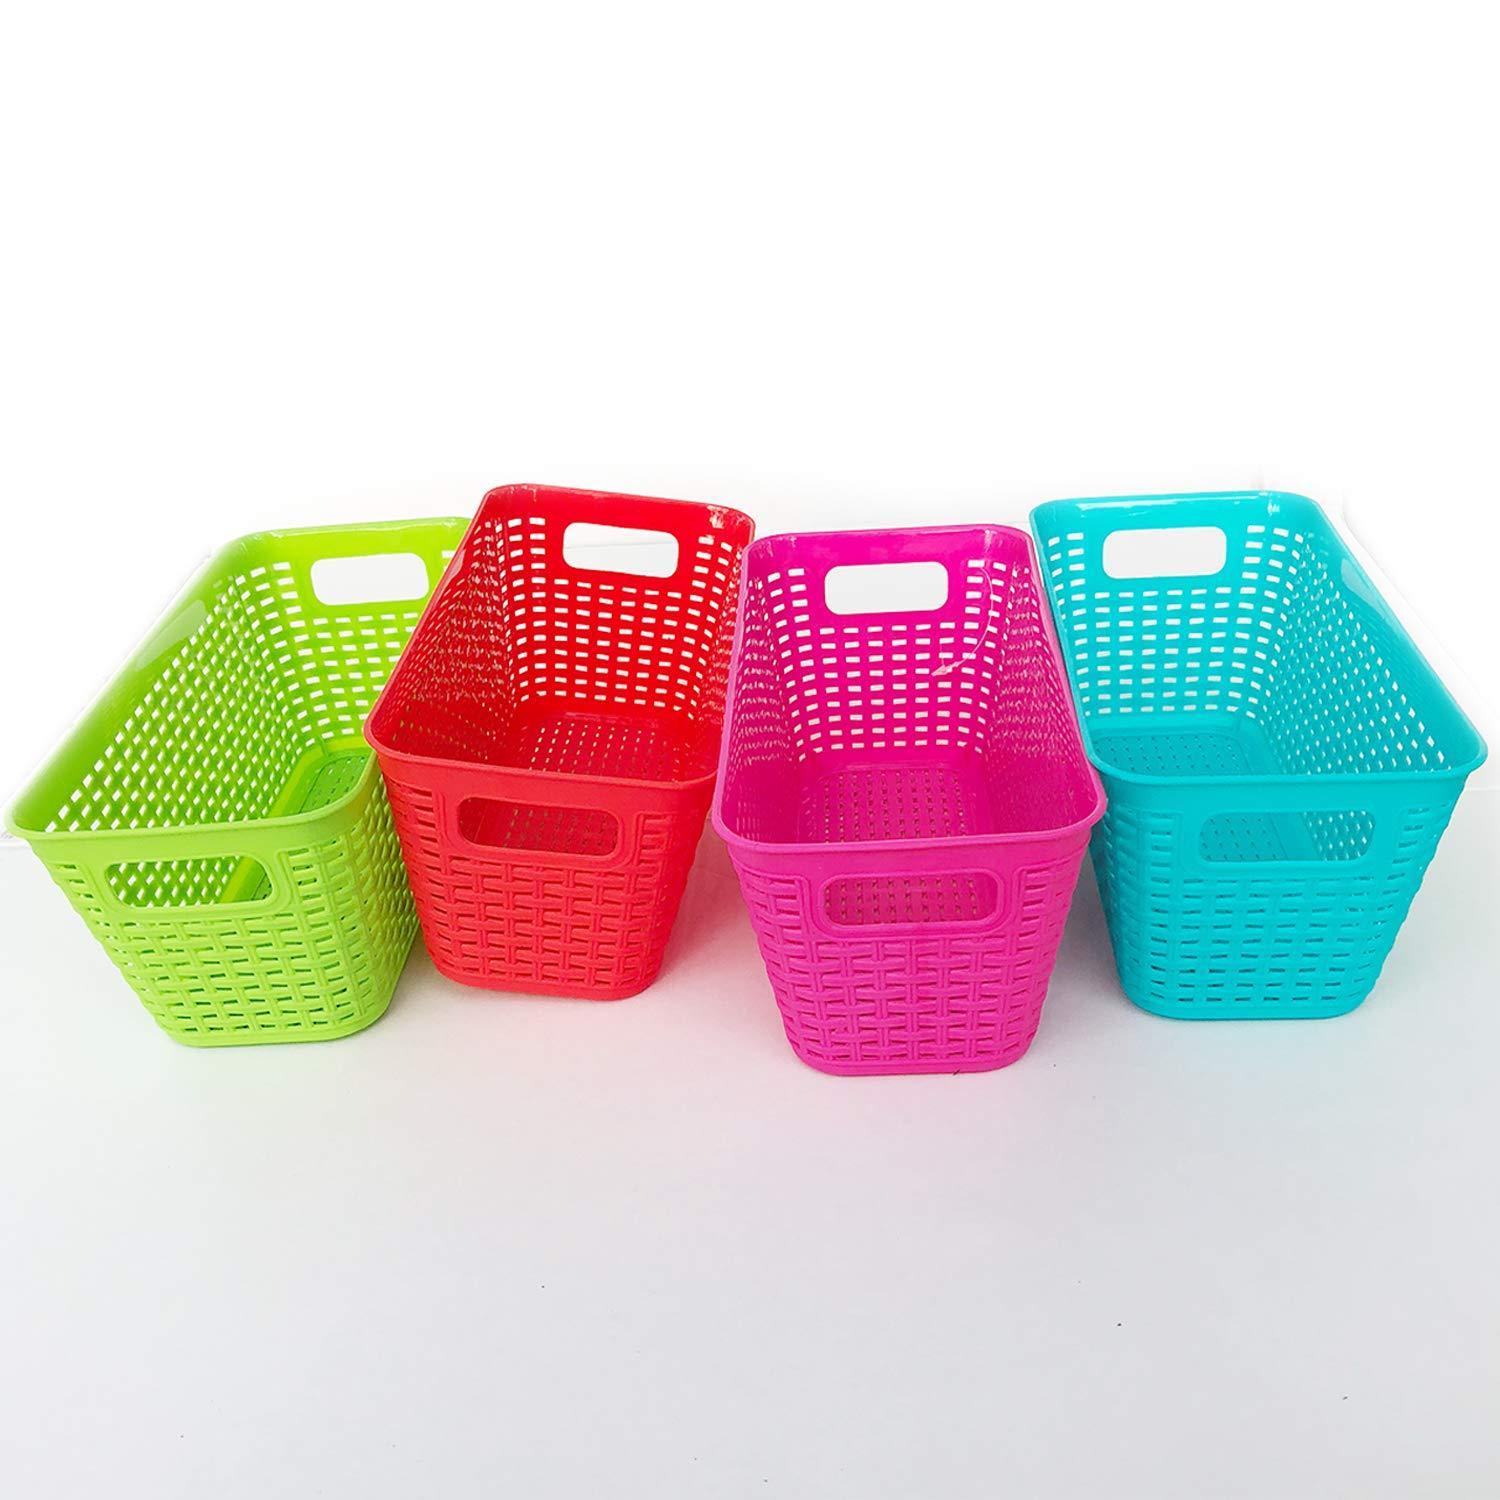 Top rated plastic baskets pantry organization and storage kitchen cabinet spice rack organizer for food shelf small colorful rectangle tray organizing for desks drawers weave deep closets art lockers set of 4